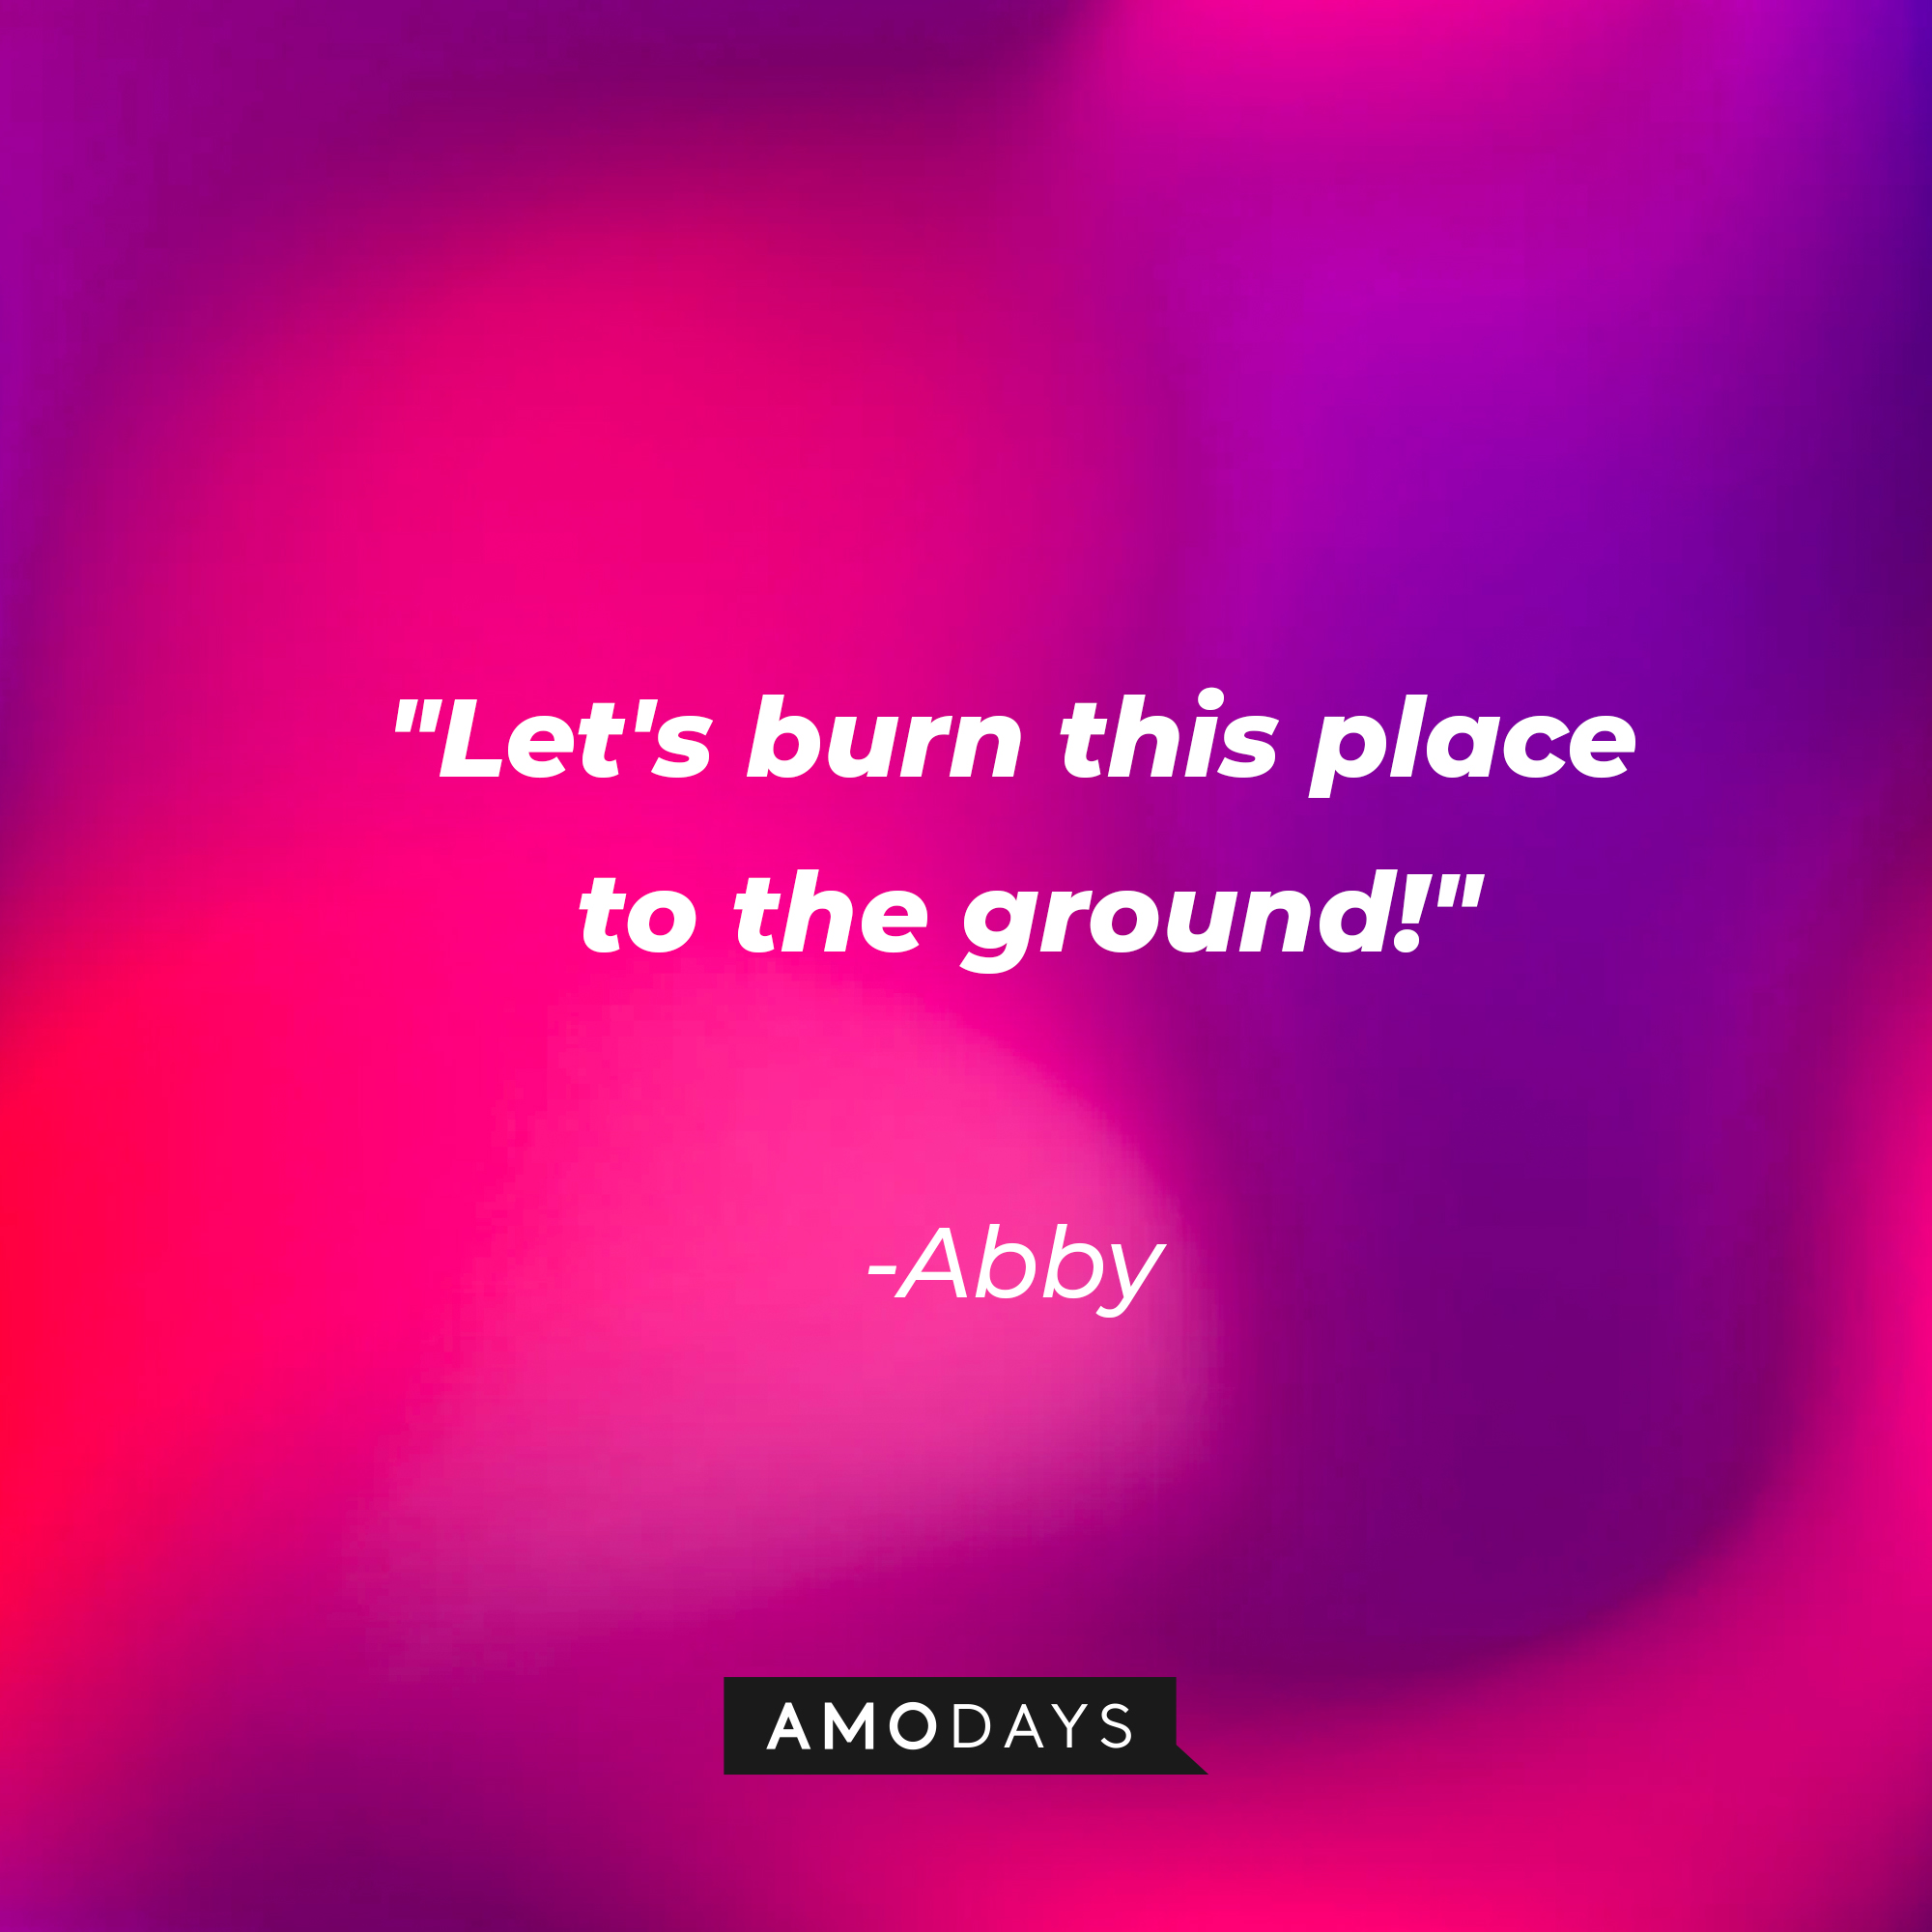 Abby's quote: "Let's burn this place to the ground!" | Source: AmoDays